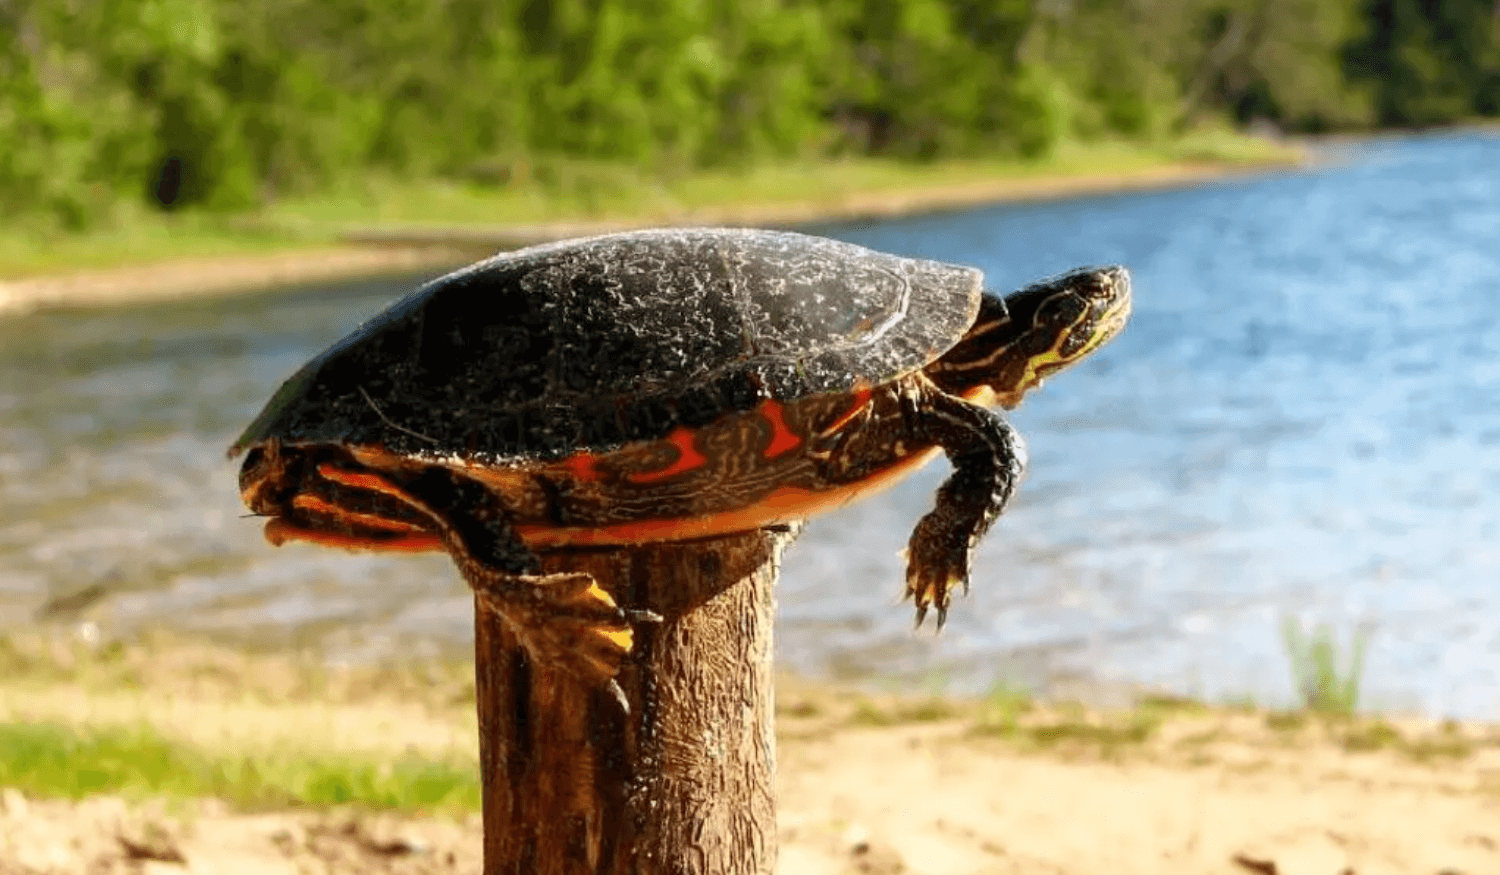 A turtle on a fence post. God never does things unintentionally, whatever we go through in life is by His design and for our good.